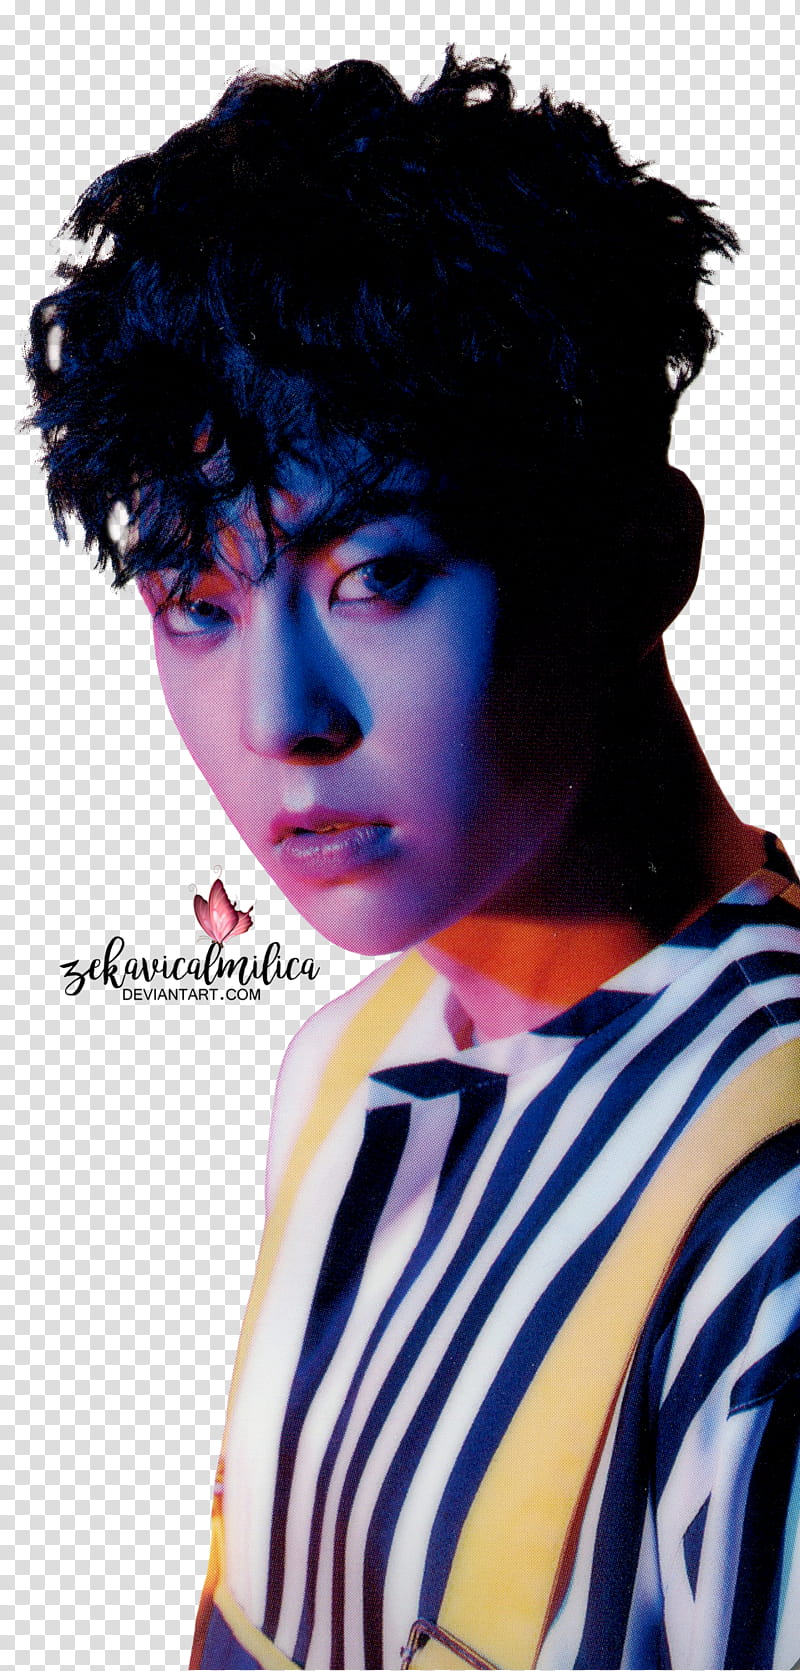 EXO Xiumin The Power Of Music, man in yellow, black, and white vertical striped shirt transparent background PNG clipart